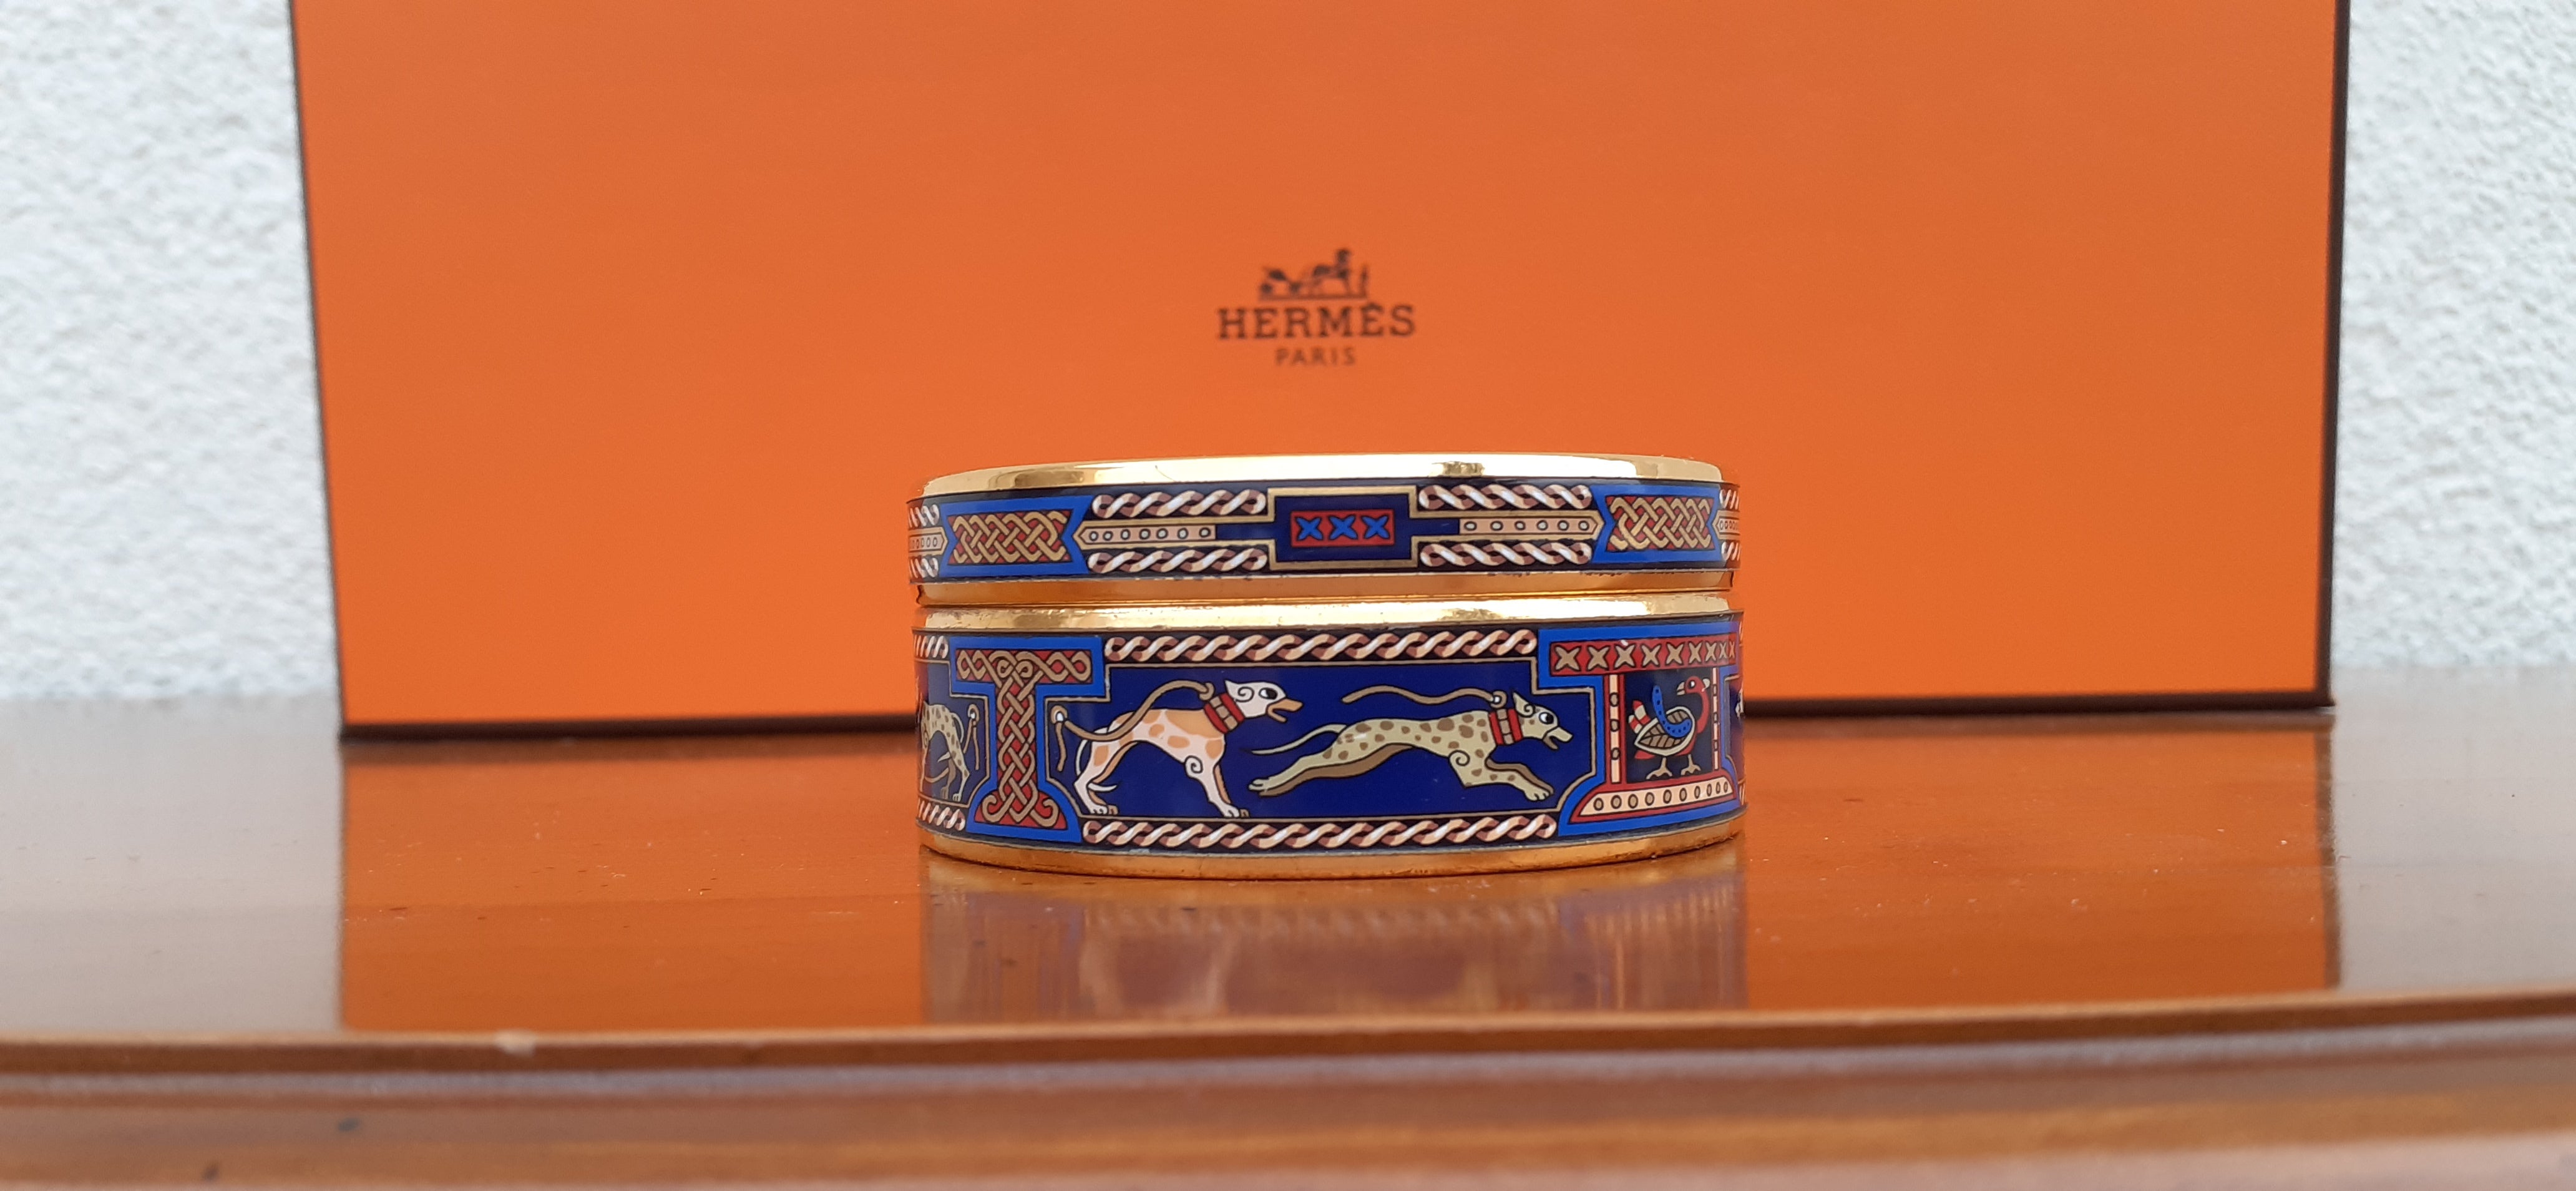 Rare and Beautiful Authentic Set of 2 Hermès Bracelets

Print: Lévriers (Greyhound dogs)

Set includes 2 Bracelets: 1 large and 1 narrow

Made in Austria 

Vintage bracelets, from the 90's

Made of printed enamel and gold plated hardware

Colorways: